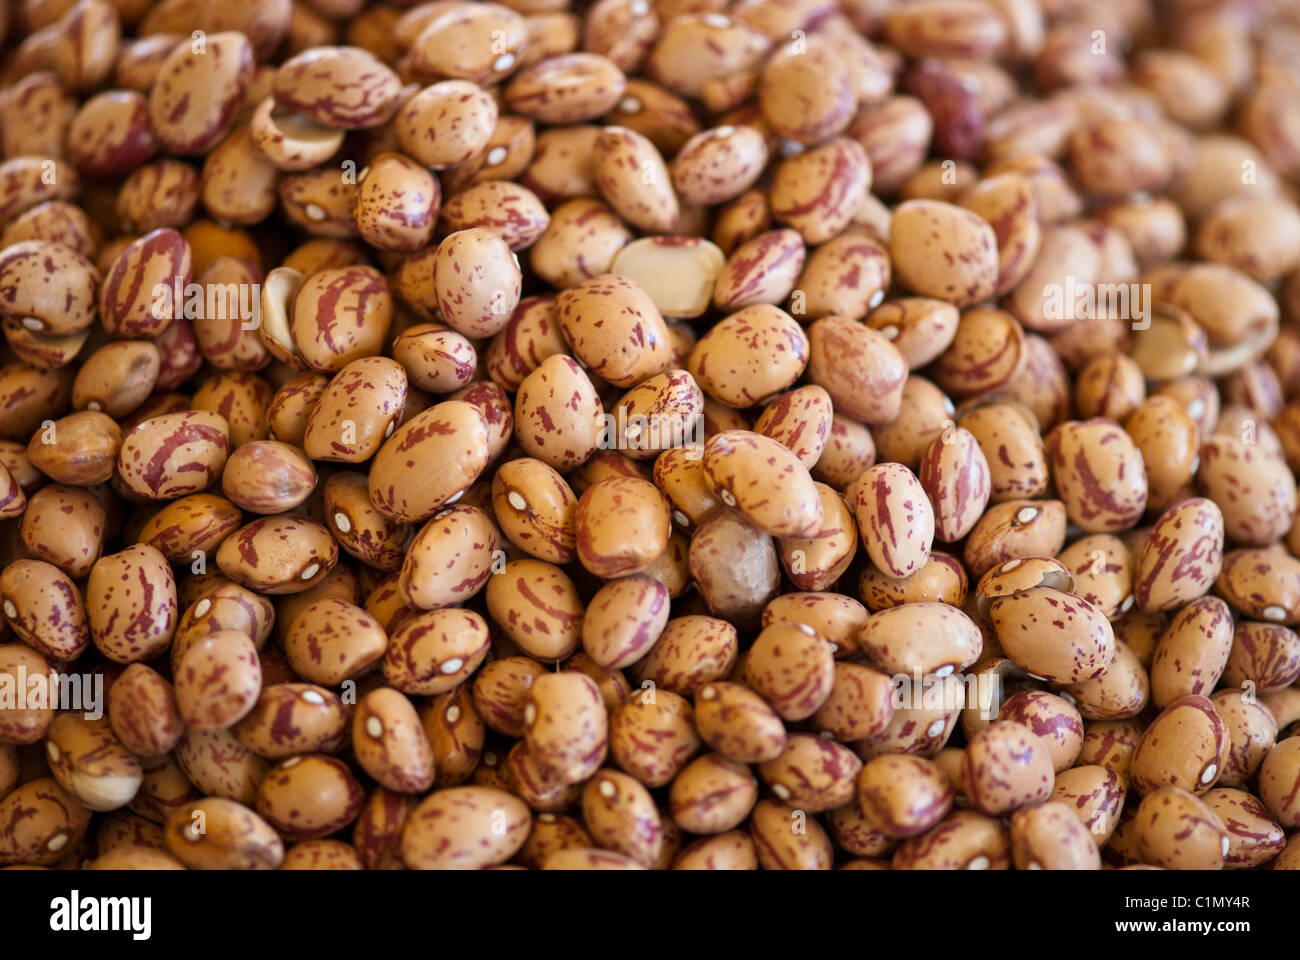 Bucket of Beans in a Tuscan Market, Italy Stock Photo